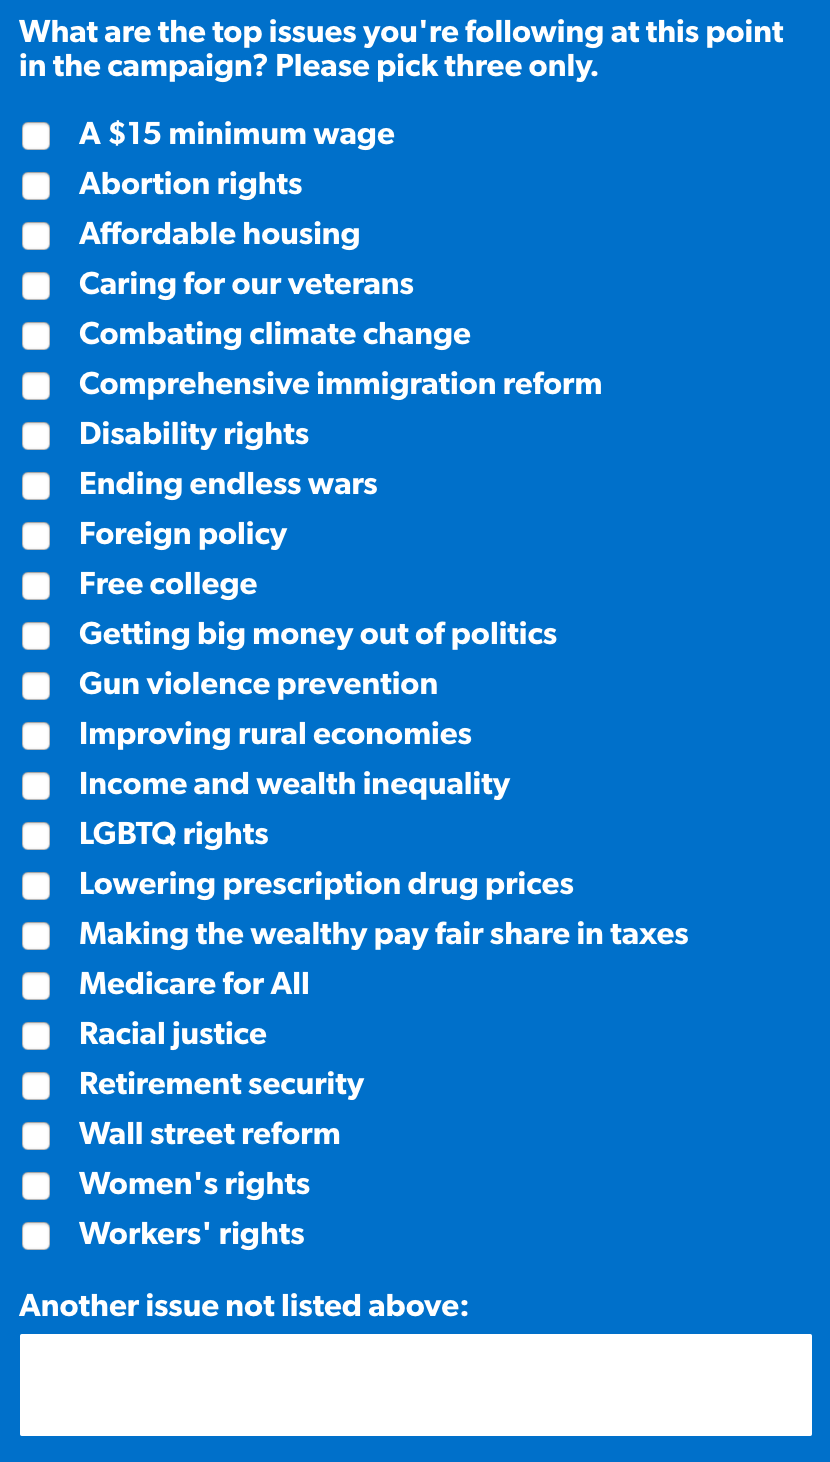 What are the top issues you're following at this point in the campaign? Please pick three only.